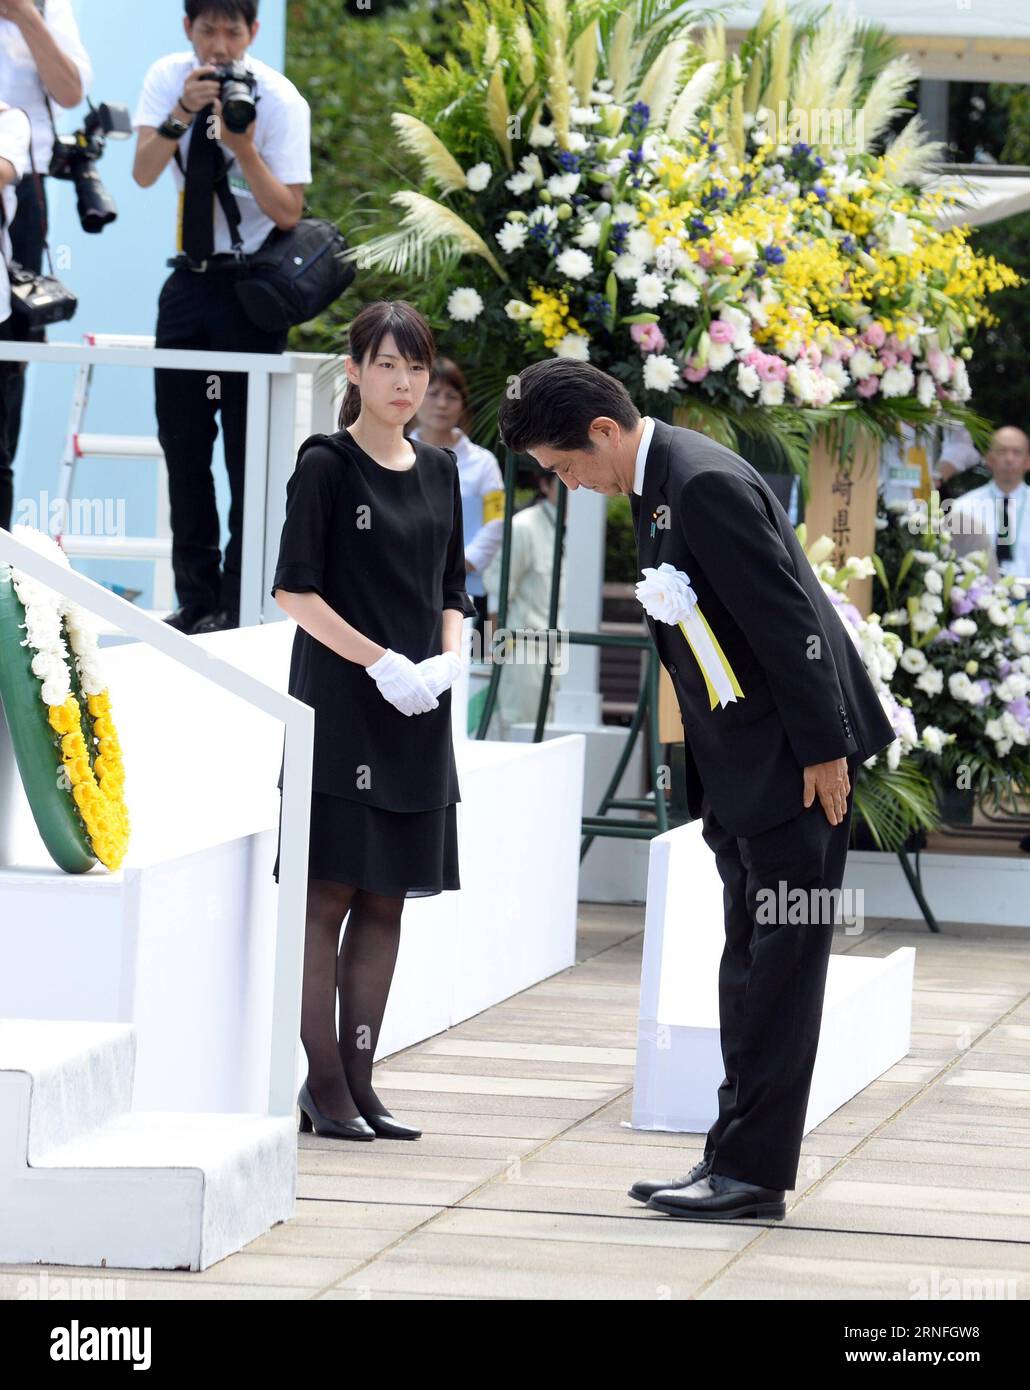 71. Jahrestag des Atombombenabwurfs auf Nagasaki (160809) -- NAGASAKI, Aug. 9, 2016 -- Japanese Prime Minister Shinzo Abe (R) bows during a ceremony commemorating the 71st anniversary of U.S. atomic bombing at the Peace Park in Nagasaki, on Aug. 9, 2016. To accelerate Japan s surrender in the World War II, the U.S. forces dropped two atomic bombs on Hiroshima and Nagasaki respectively on Aug. 6 and 9, 1945. ) (syq) JAPAN-NAGASAKI-ATOMIC BOMBING-71ST ANNIVERSARY-COMMEMORATION MaxPing PUBLICATIONxNOTxINxCHN   71 Anniversary the Atombombenabwurfs on Nagasaki 160809 Nagasaki Aug 9 2016 Japanese Pr Stock Photo